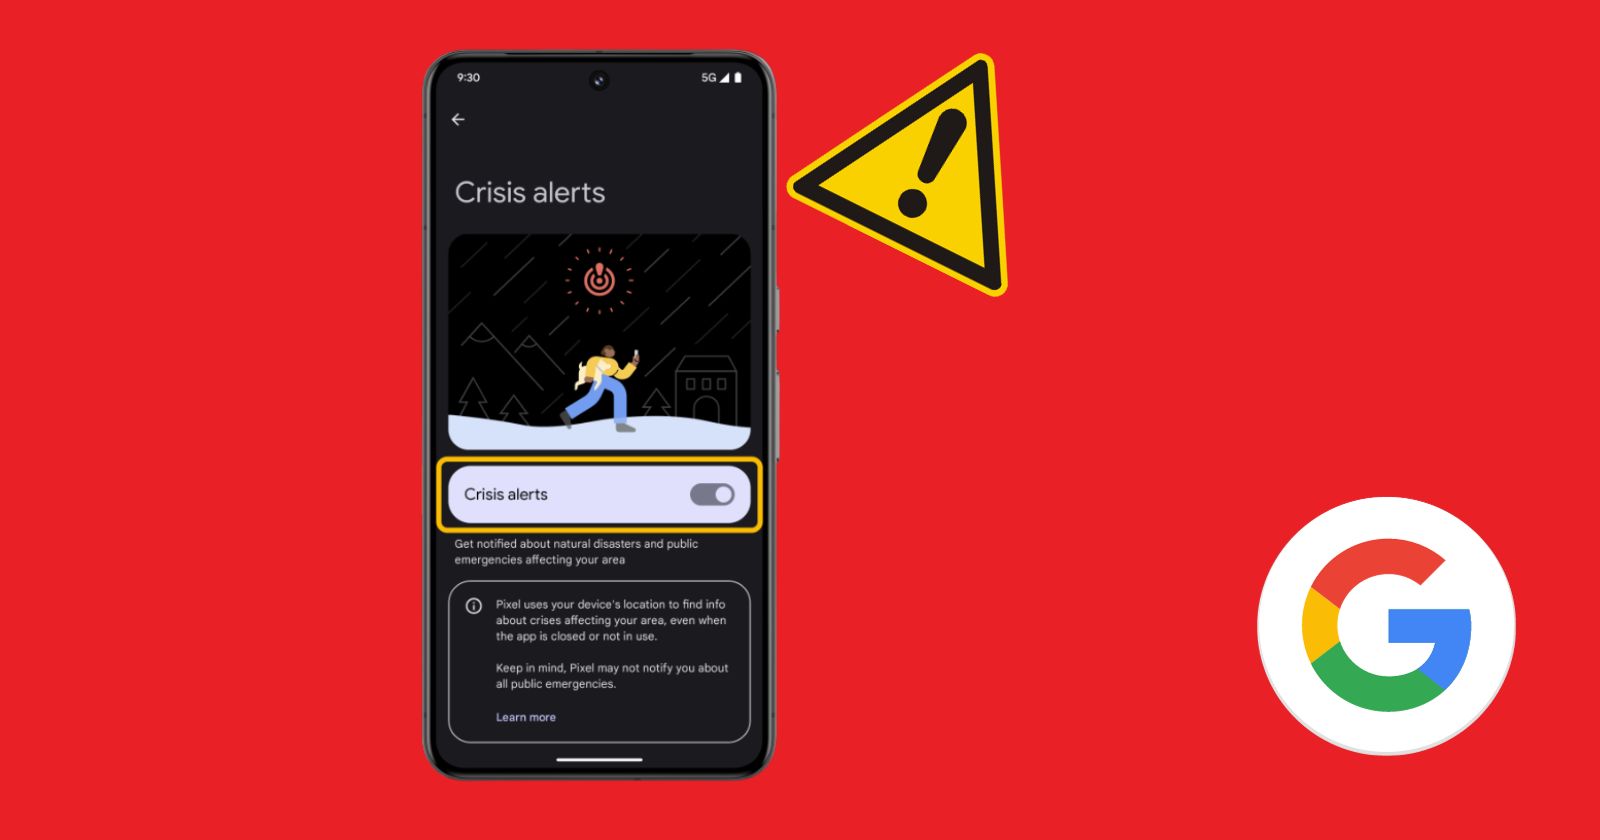 Here is how you can enable Crisis Alerts on your Google Pixel device